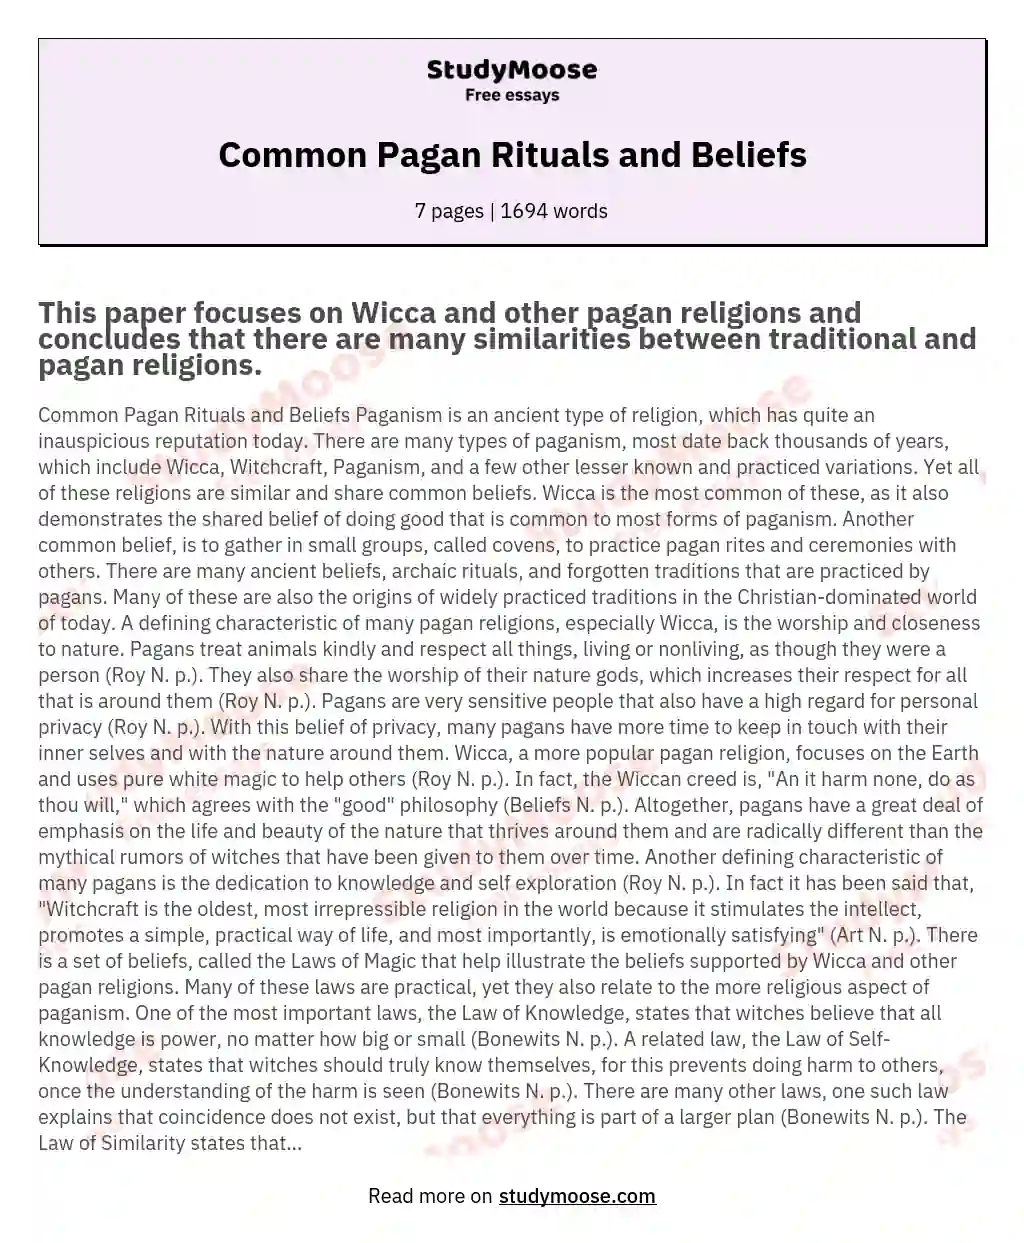 Common Pagan Rituals and Beliefs essay